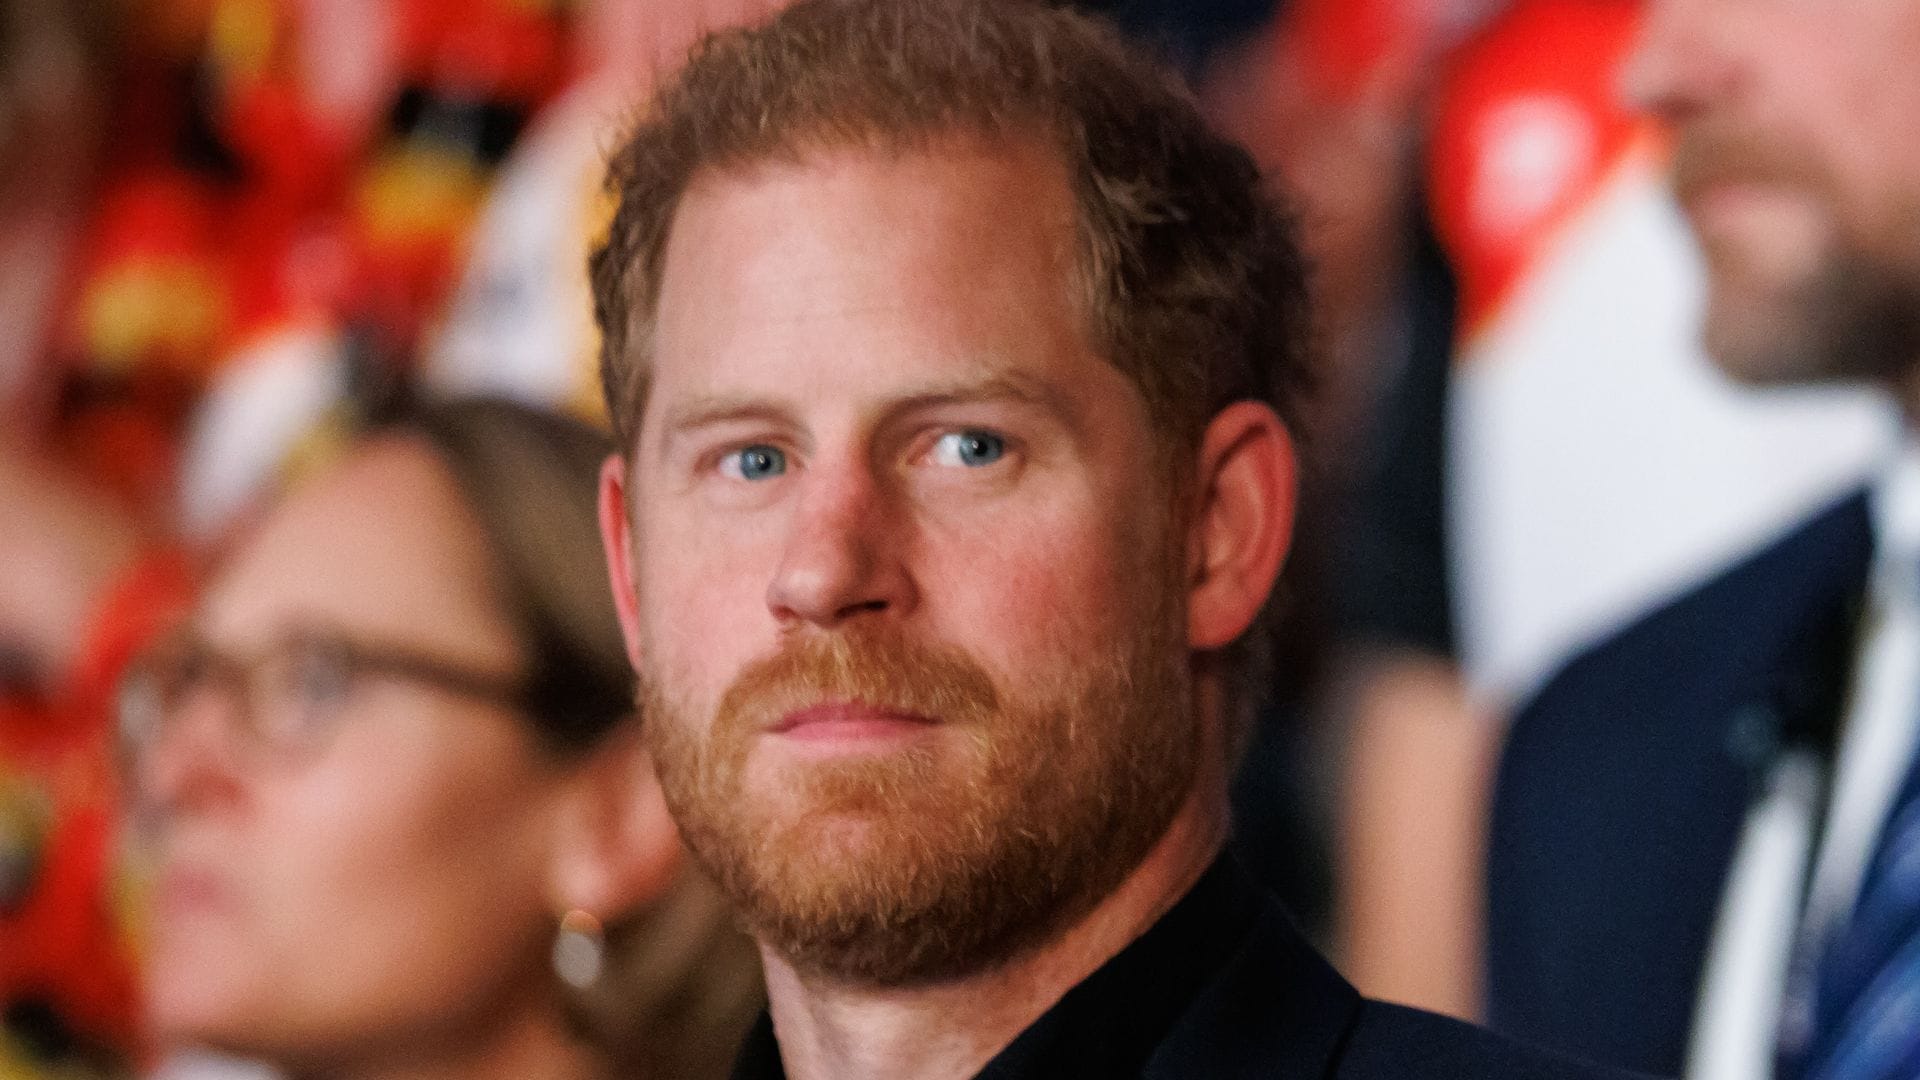 The reason Prince Harry is 'reluctant' to show his kids publicly: Report